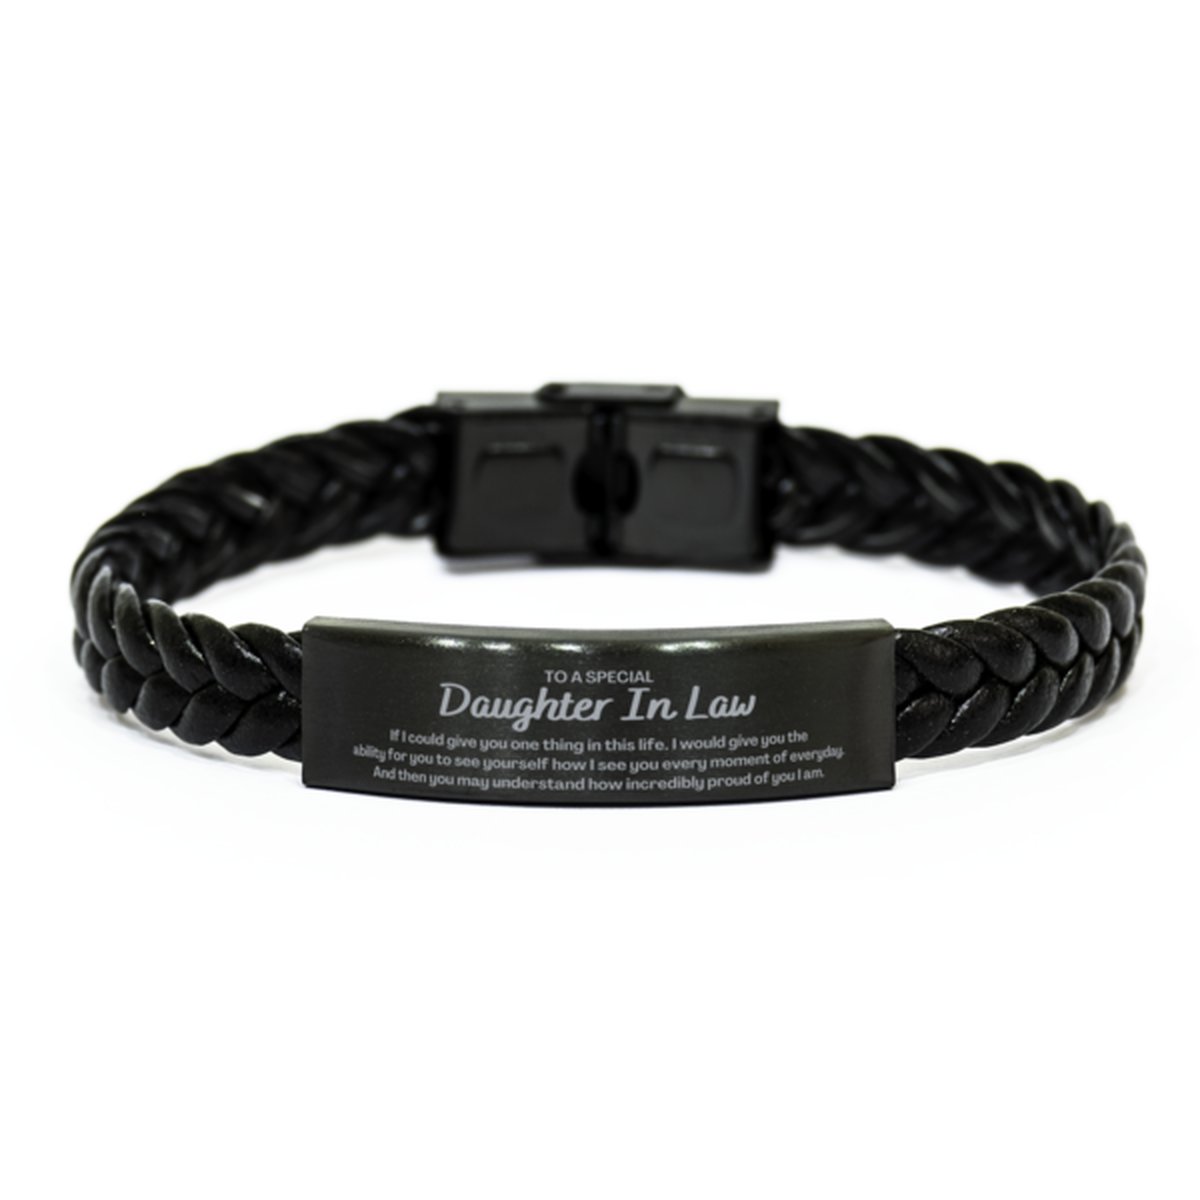 To My Daughter In Law Braided Leather Bracelet, Gifts For Daughter In Law Engraved, Inspirational Gifts for Christmas Birthday, Epic Gifts for Daughter In Law To A Special Daughter In Law how incredibly proud of you I am